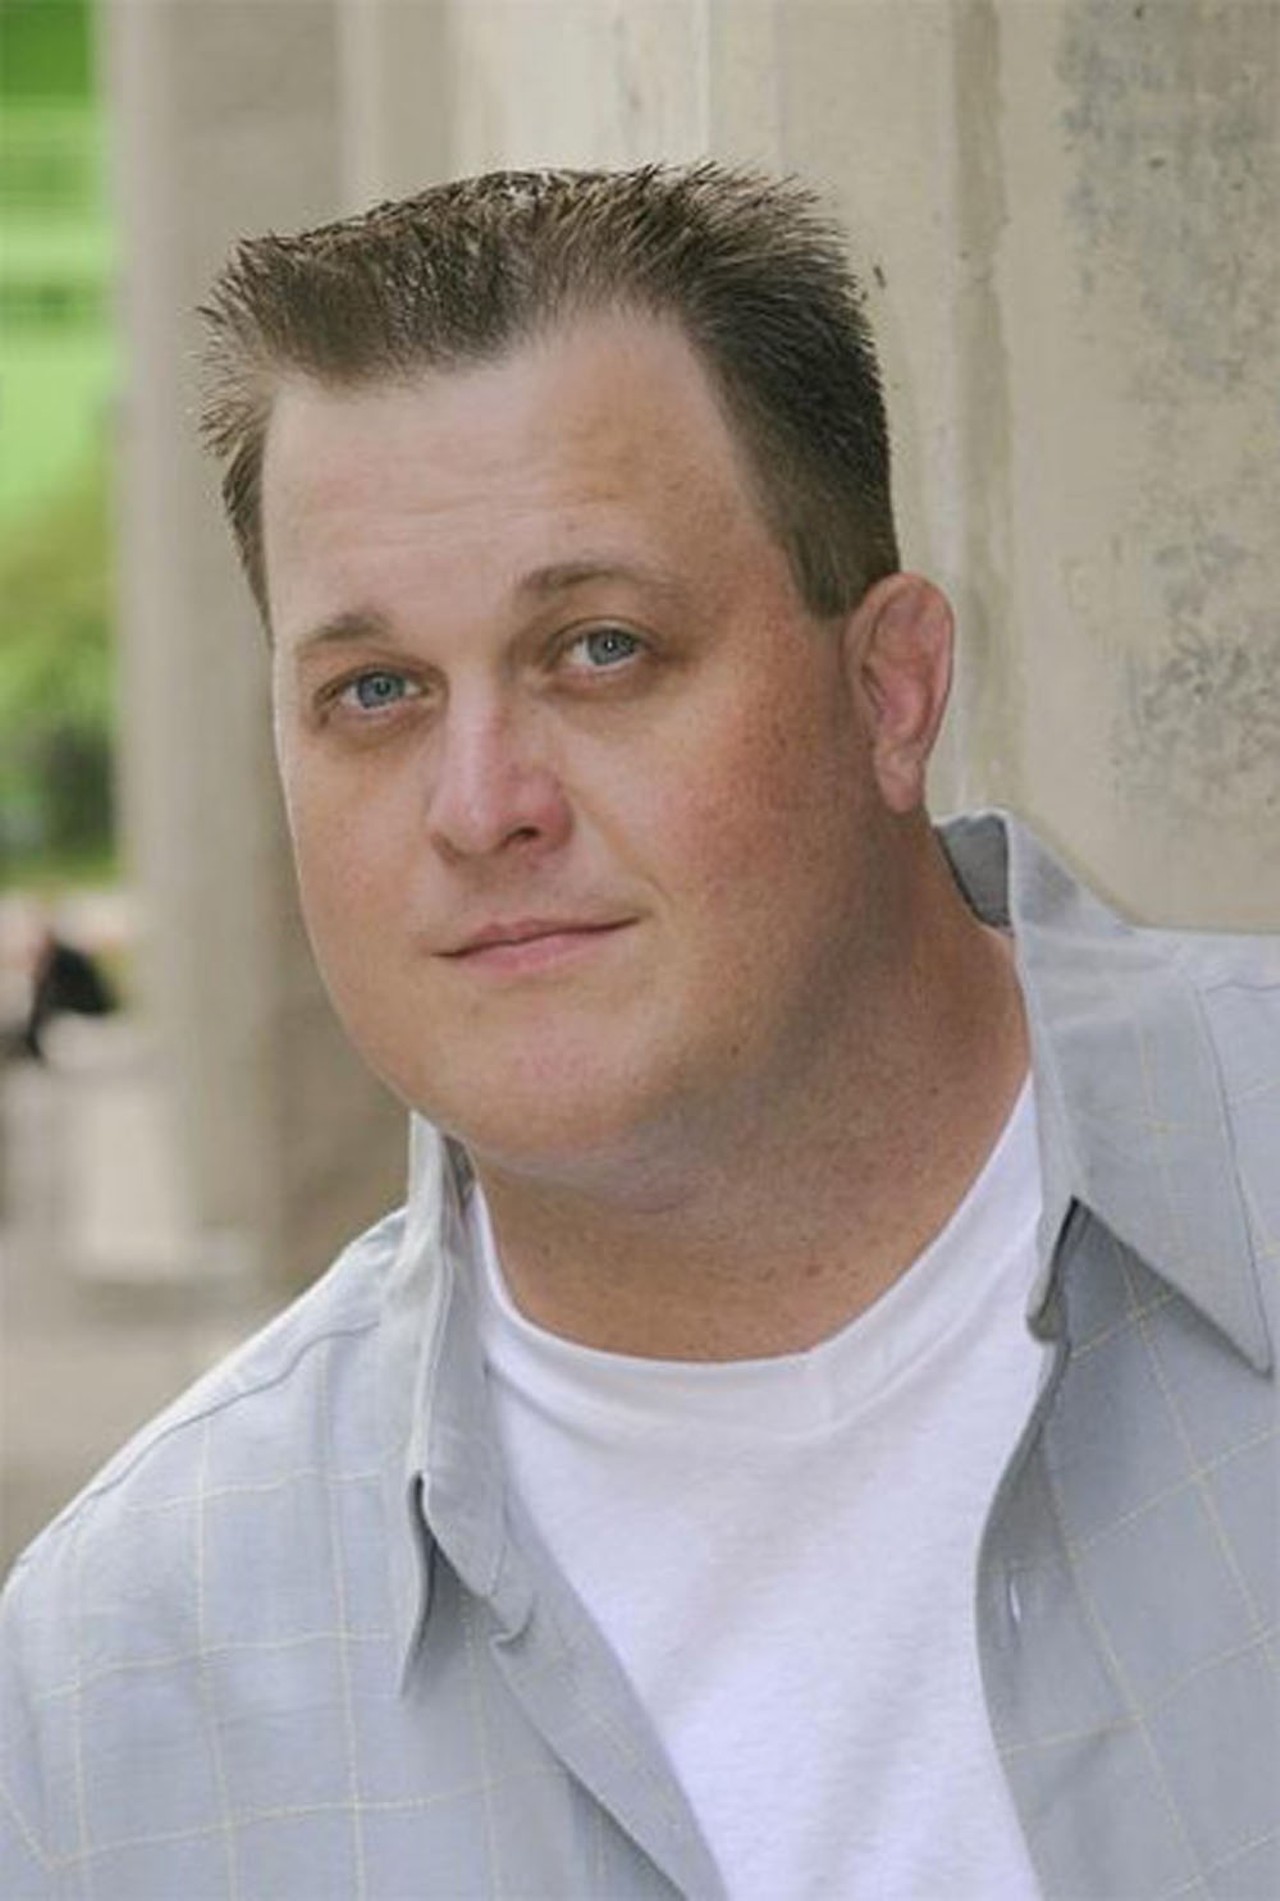 Billy Gardell @ Andiamo&#146;s
You&#146;ll remember Billy Gardell form the hit CBS show &#147;Mike & Molly&#148; that he starred in with Melissa McCarthy. If you&#146;re a fan of that blue-collar comedy then Gardell is for you
Friday, November 18; Doors at 8 p.m.; Tickets at andiamoitalia.com